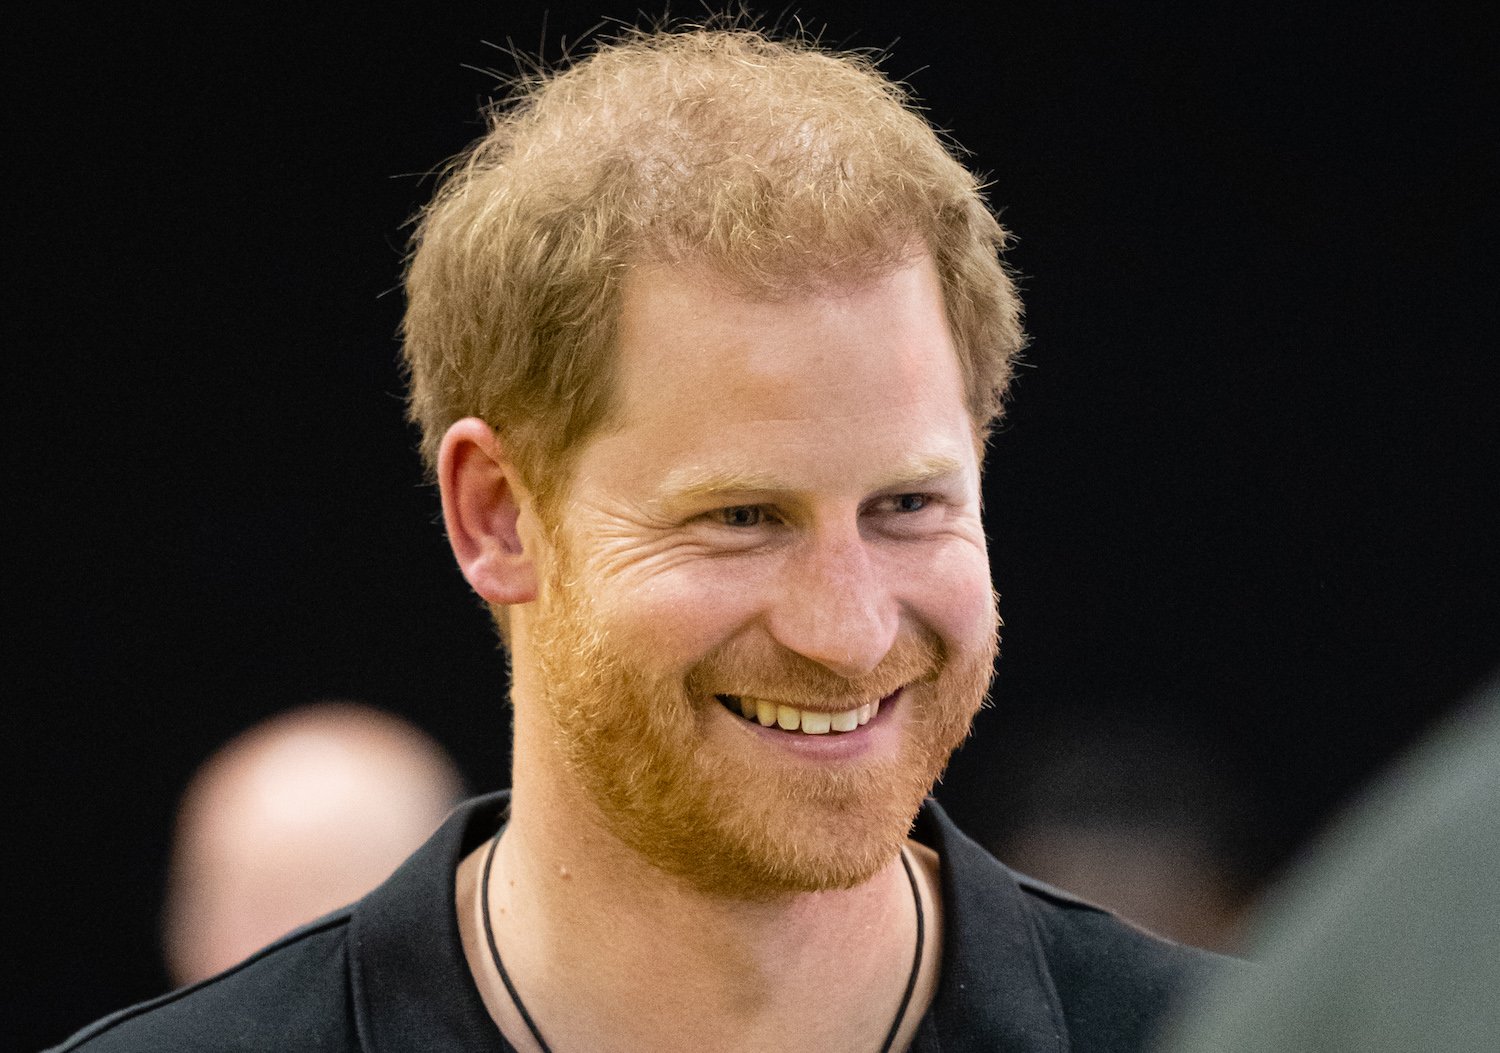 Prince Harry smiles while wearing a black shirt at the Invictus Games